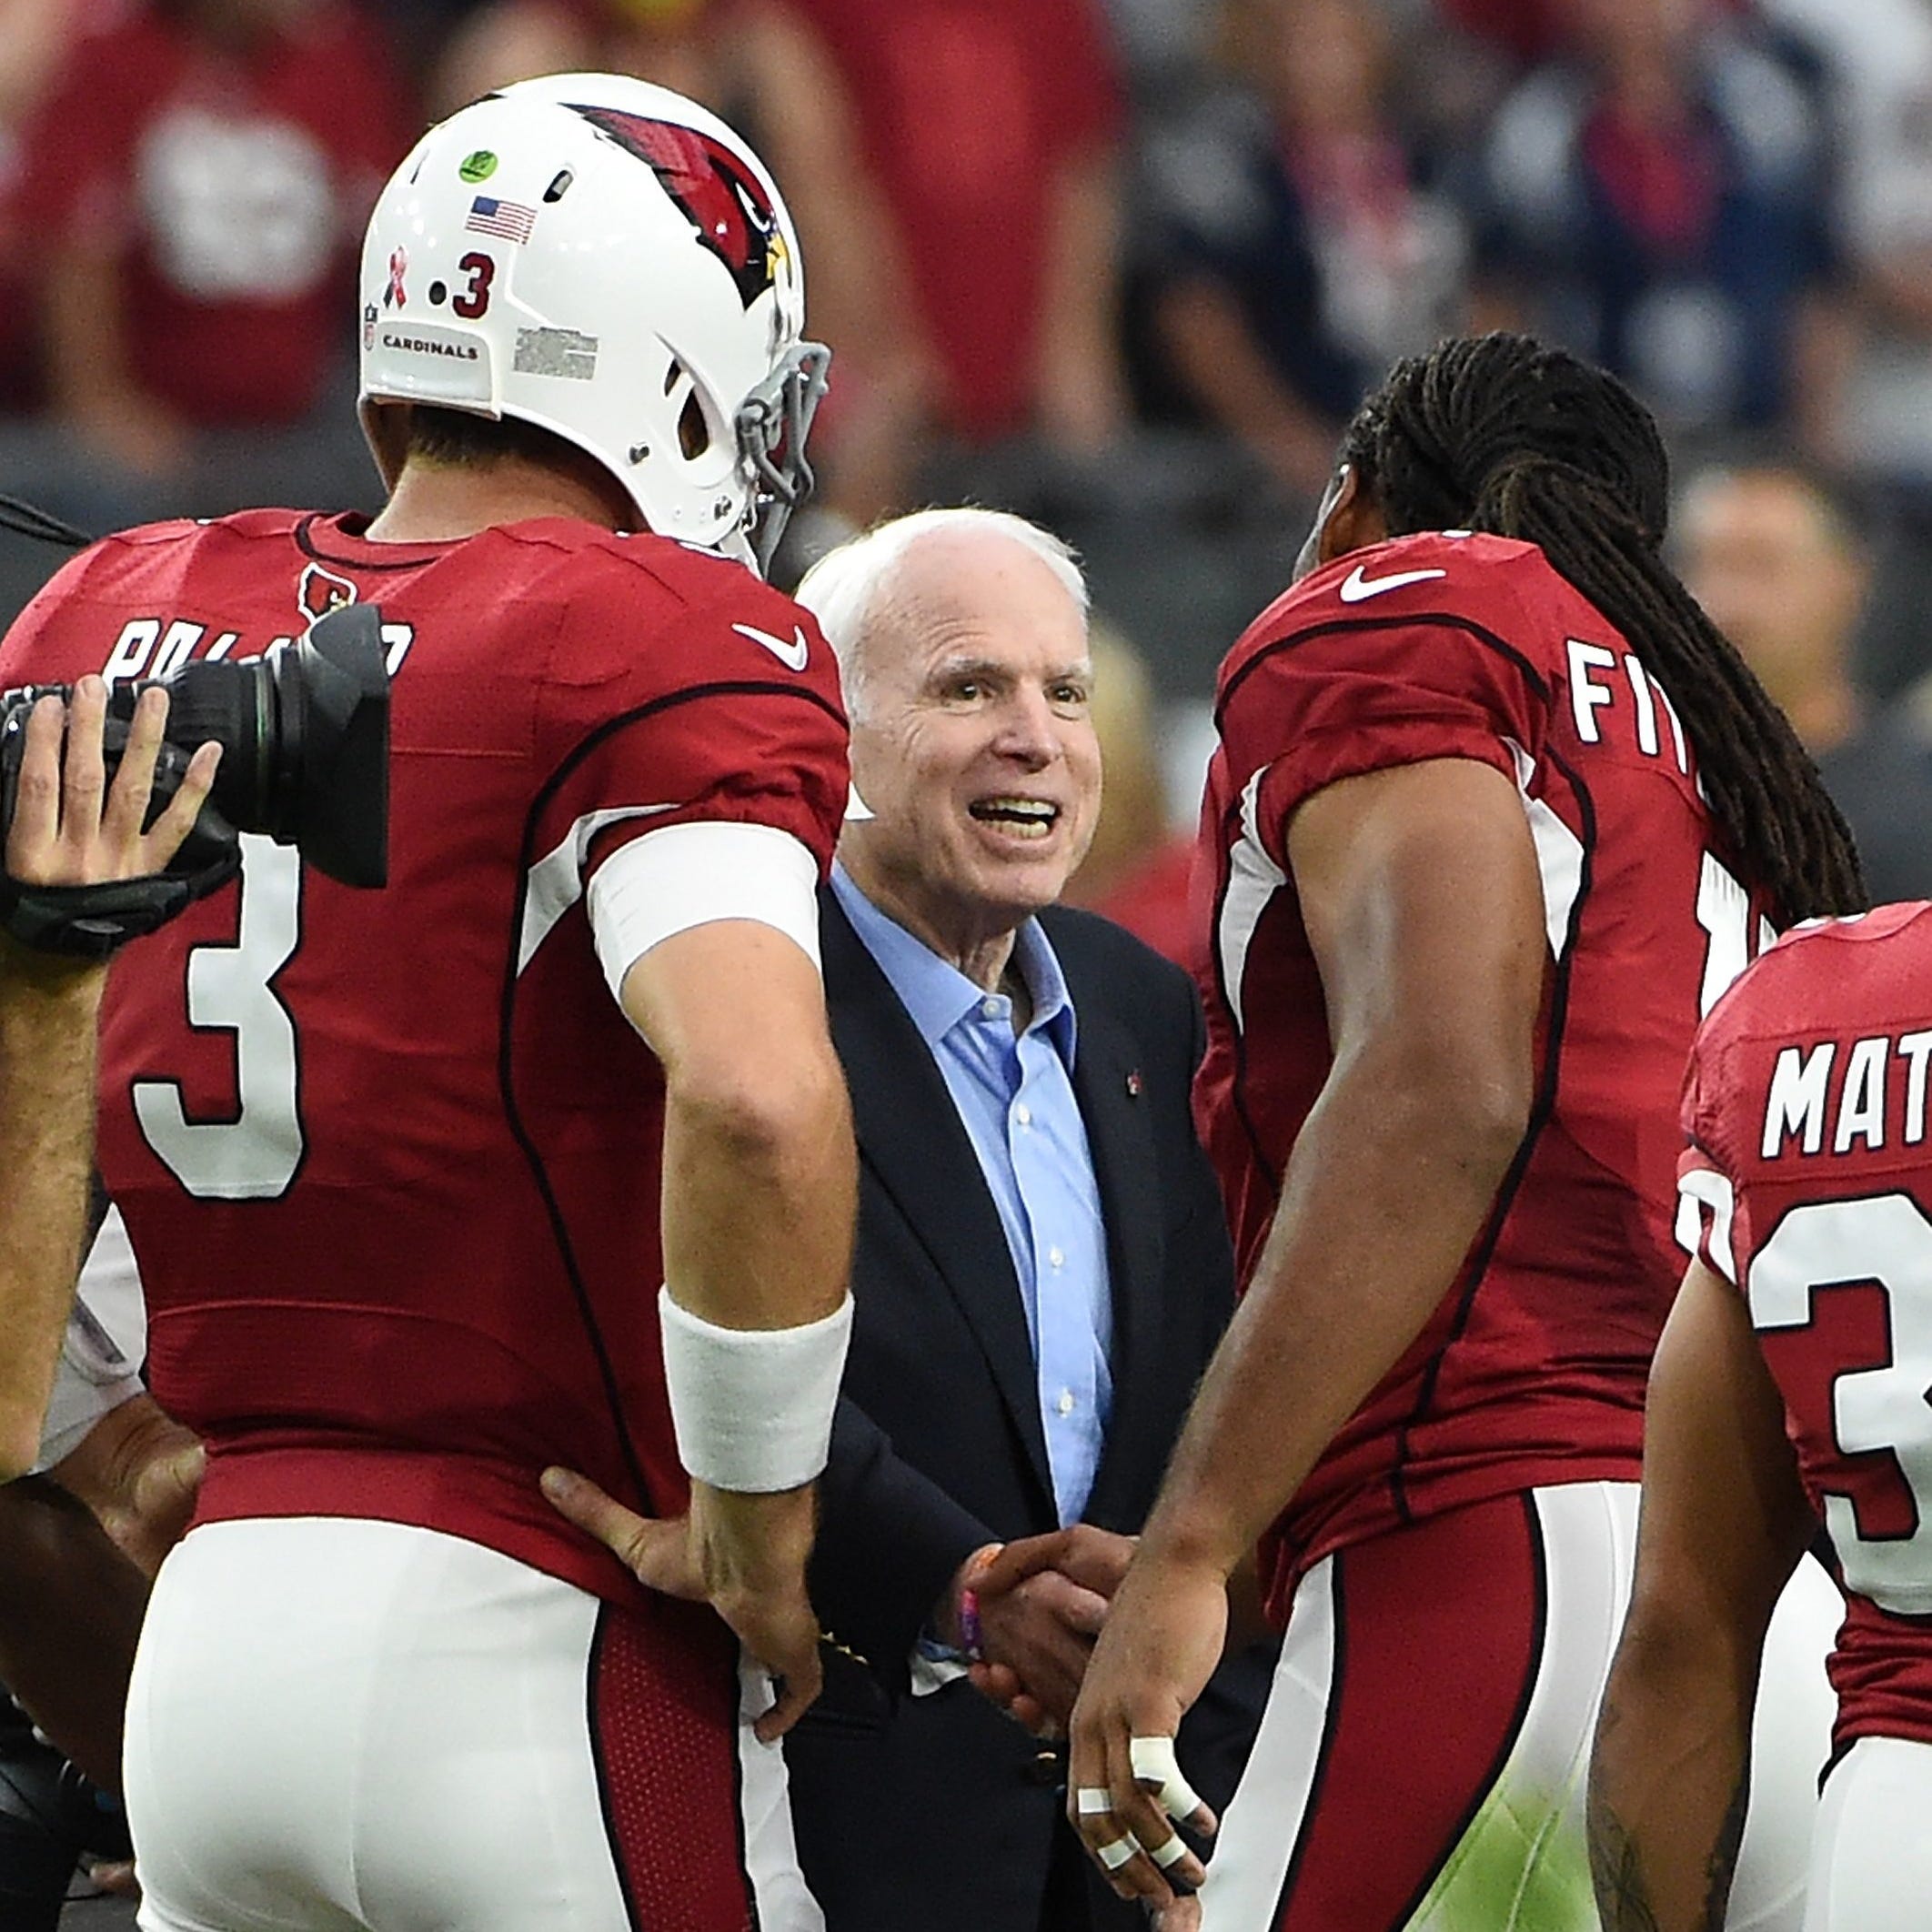 Cardinals wide receiver Larry Fitzgerald and former quarterback Carson Palmer shake hands with Sen. John McCain prior to a game on 2016.